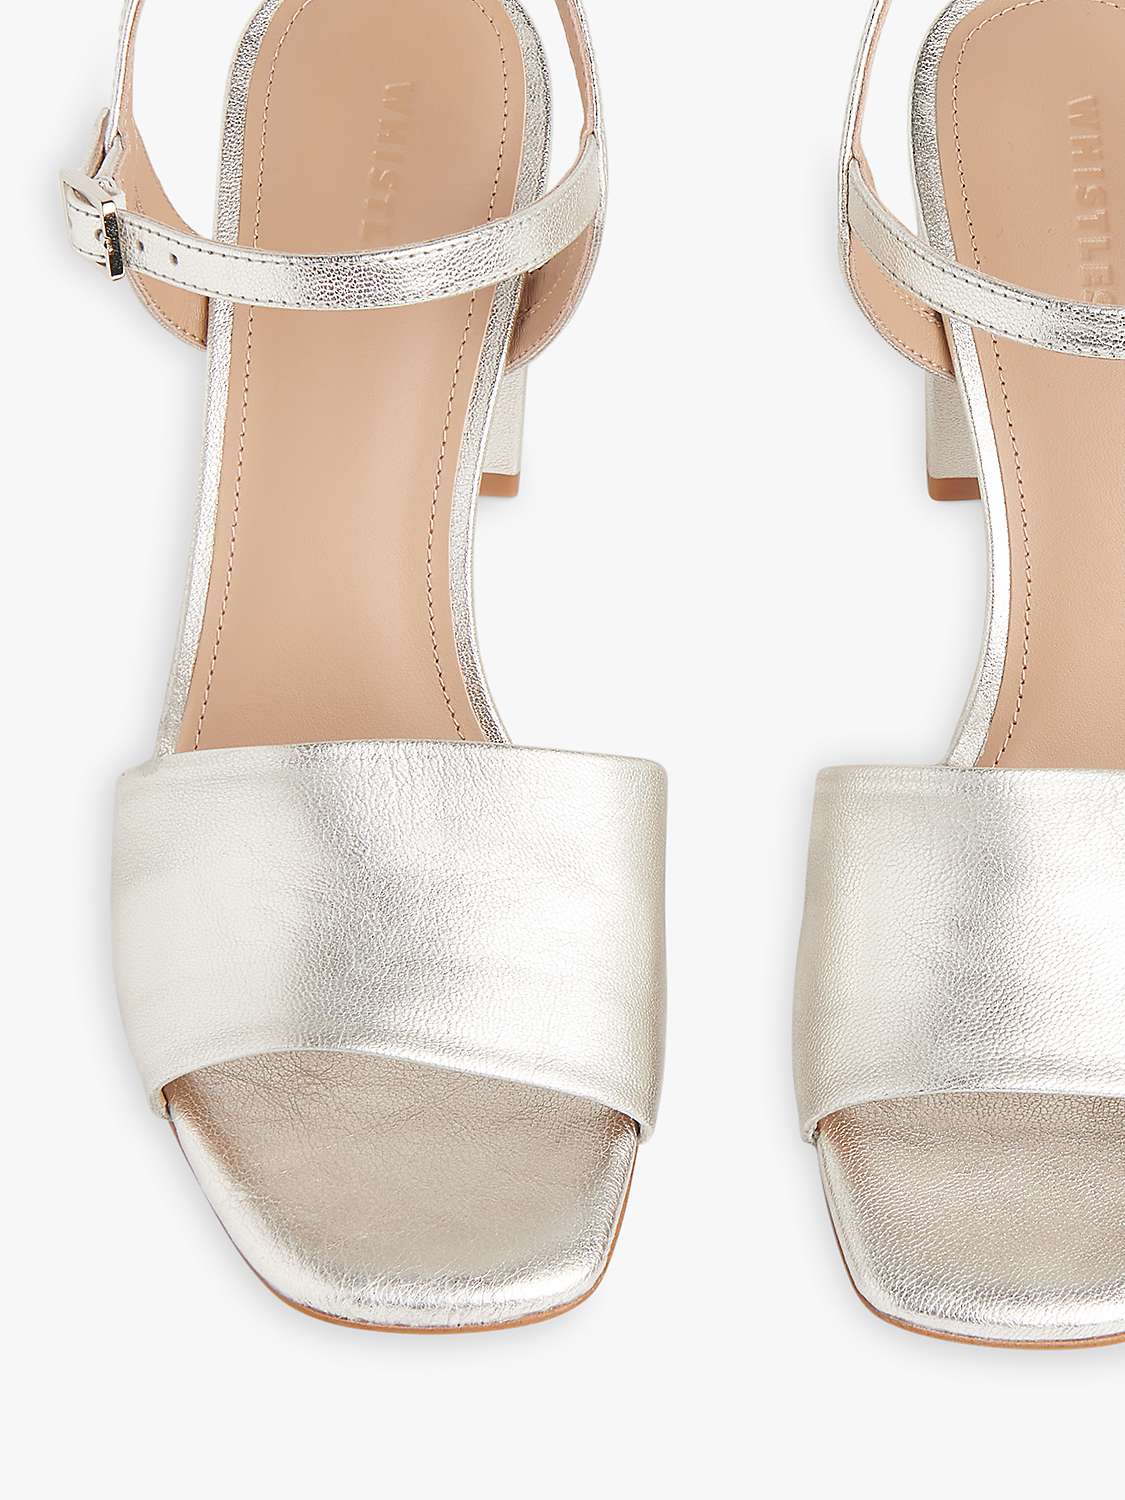 Buy Whistles Lilley Leather Block Heel Sandals, Silver Online at johnlewis.com